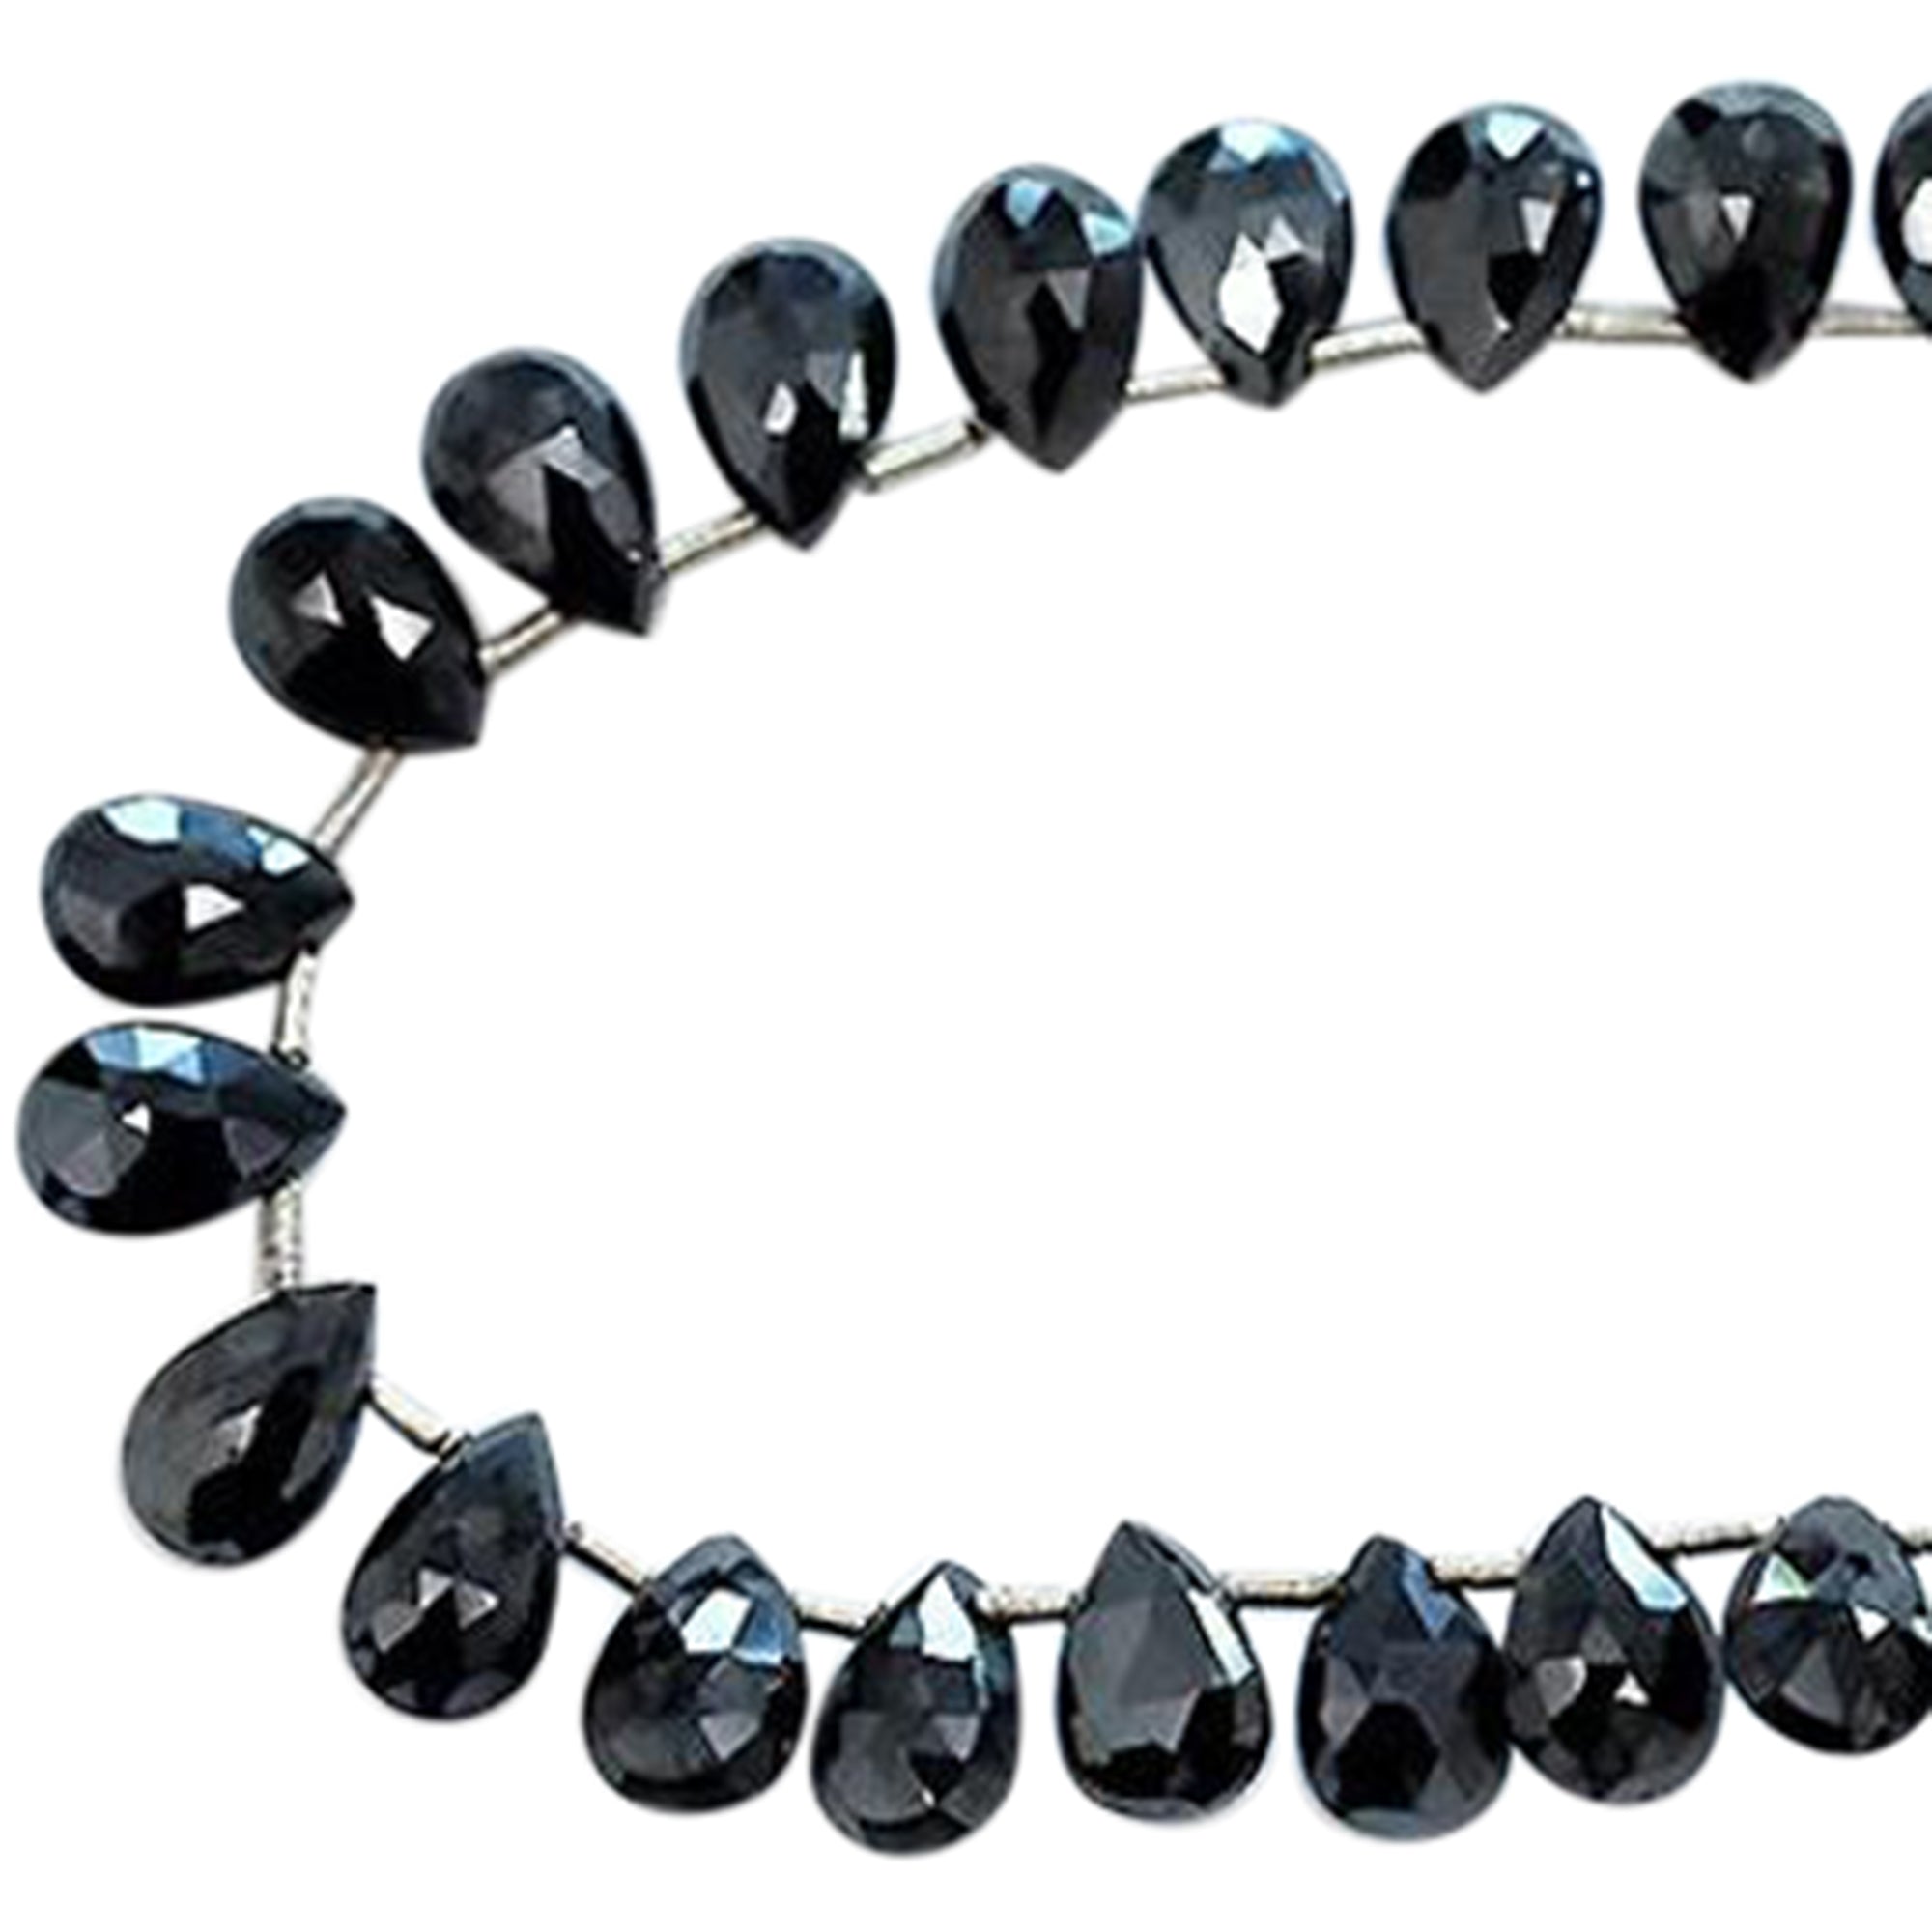 Mystic Black Spinel 9X6 To 10X7 MM Faceted Pear Shape Beads Strand